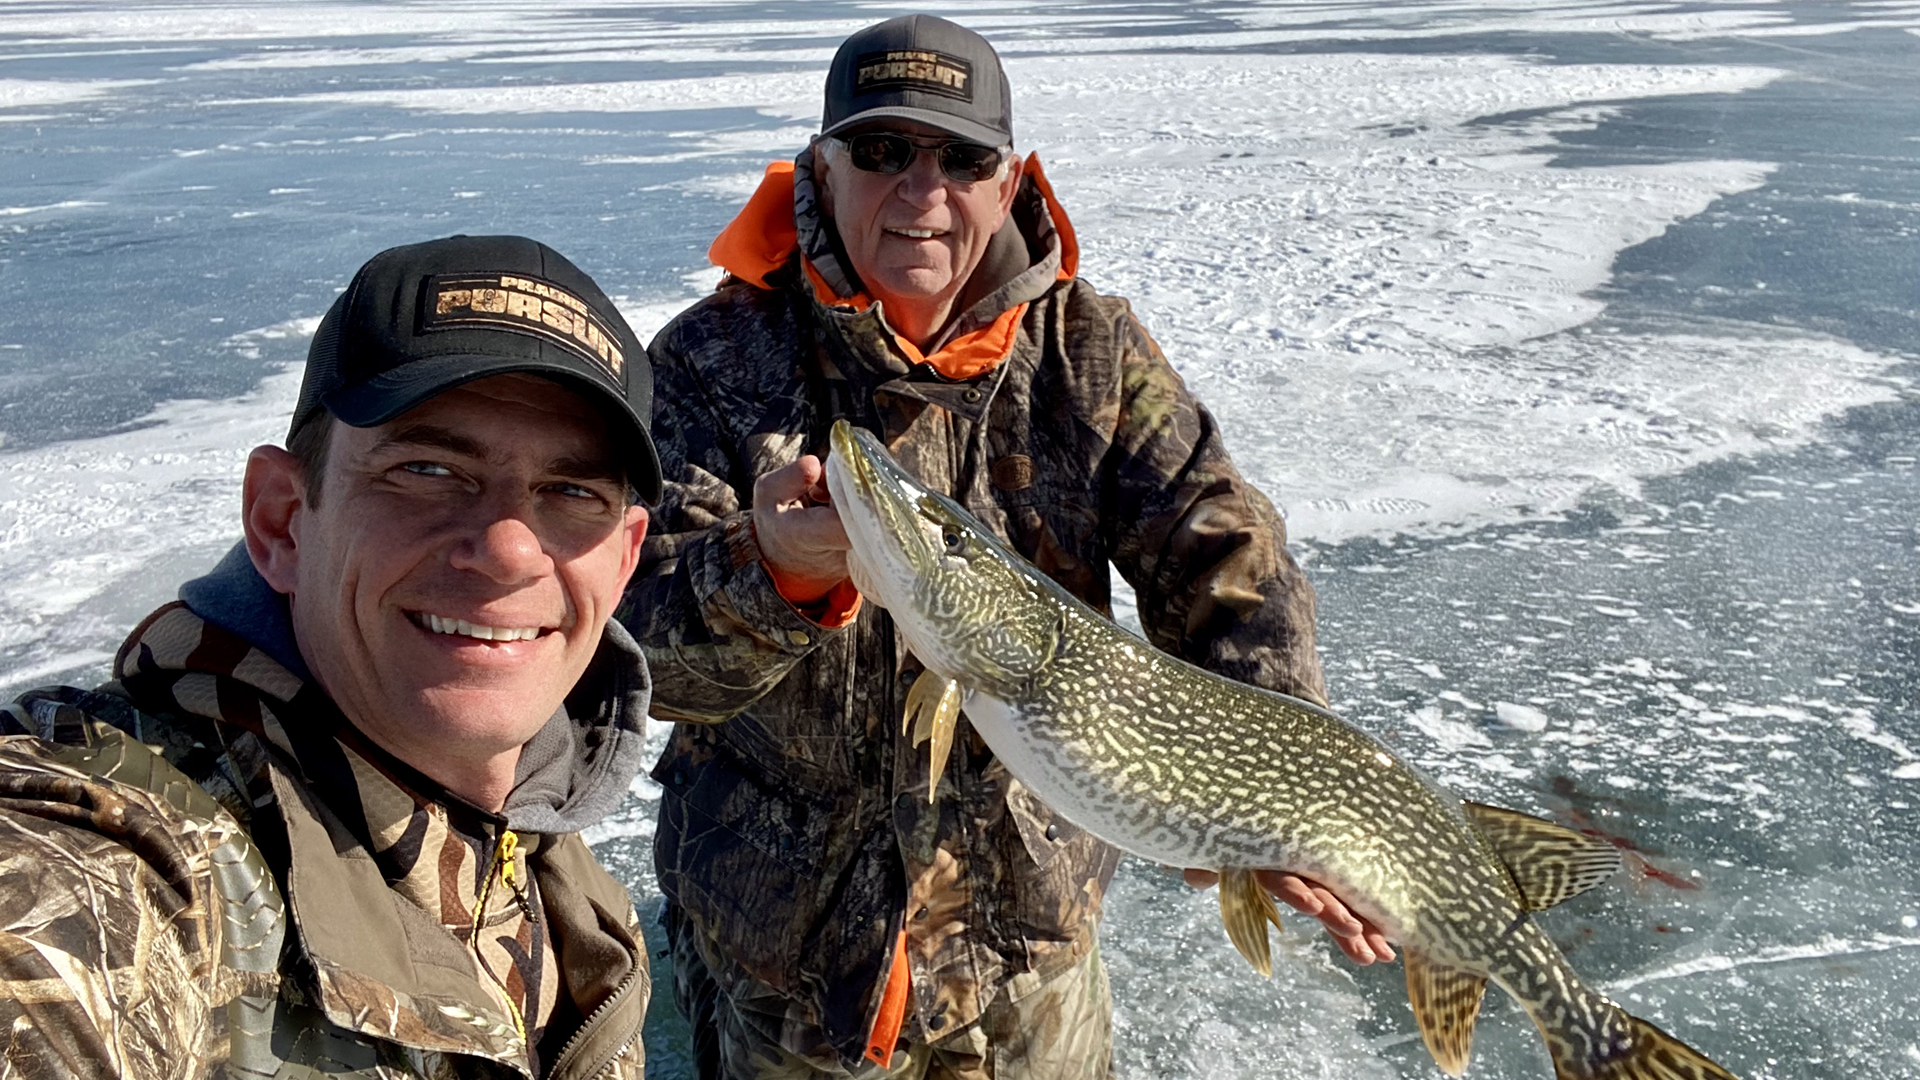 Ice Fishing with Dad on Last Mountain Lake by Greg Toogood